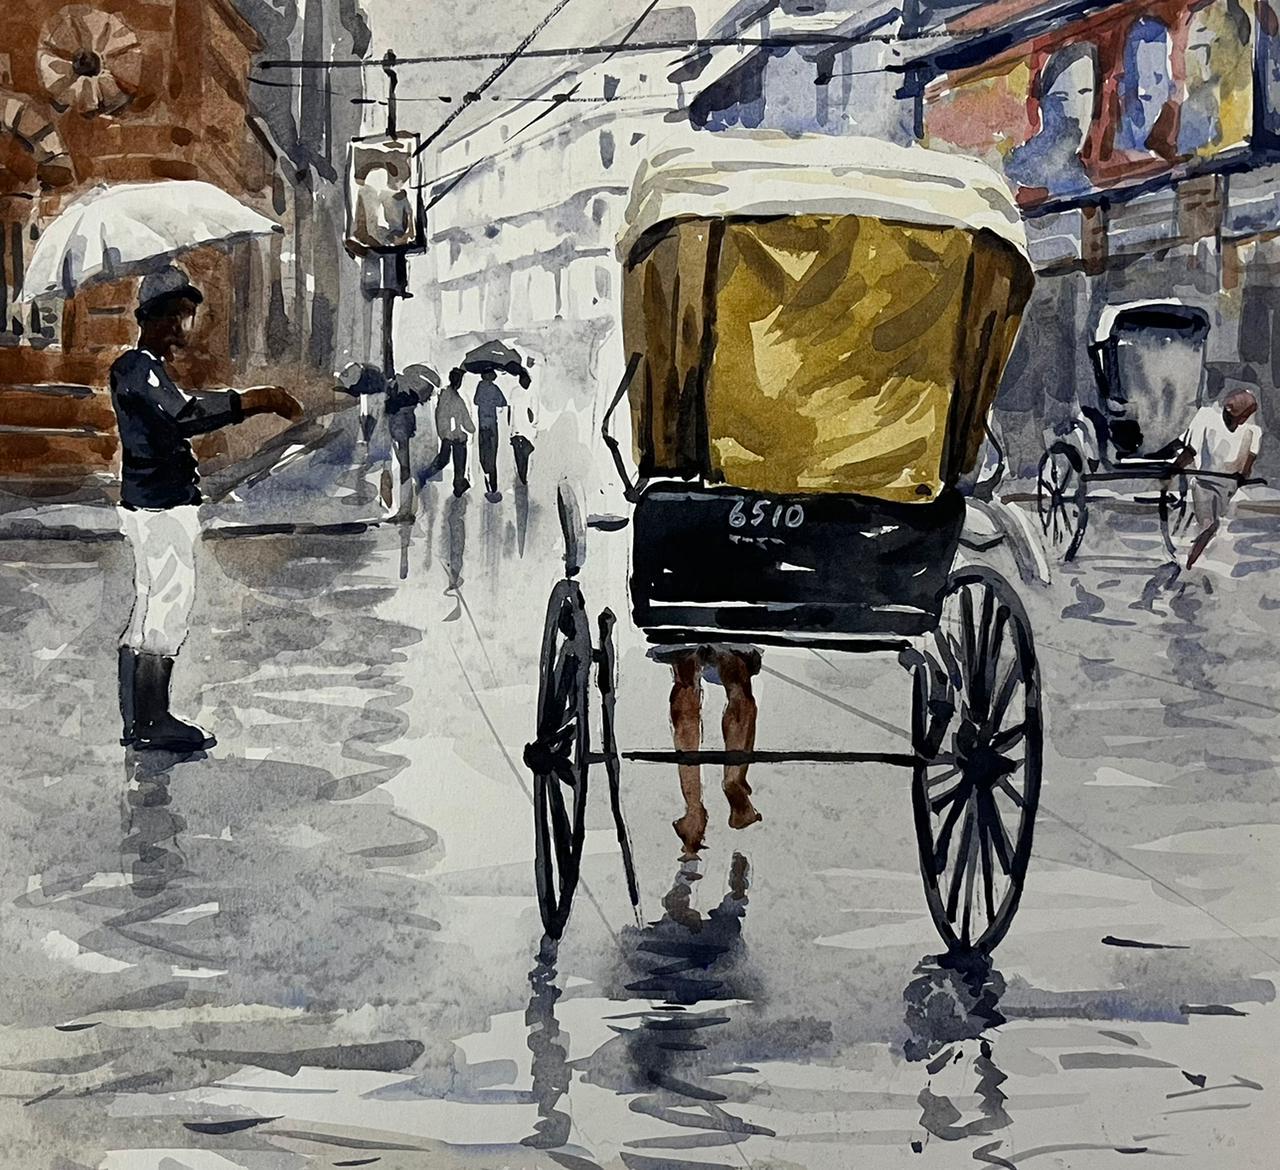 Raju Sarkar Figurative Painting - Kolkata city, (Set Of 4) Watercolour on Paper by Contemporary Artist “In Stock”